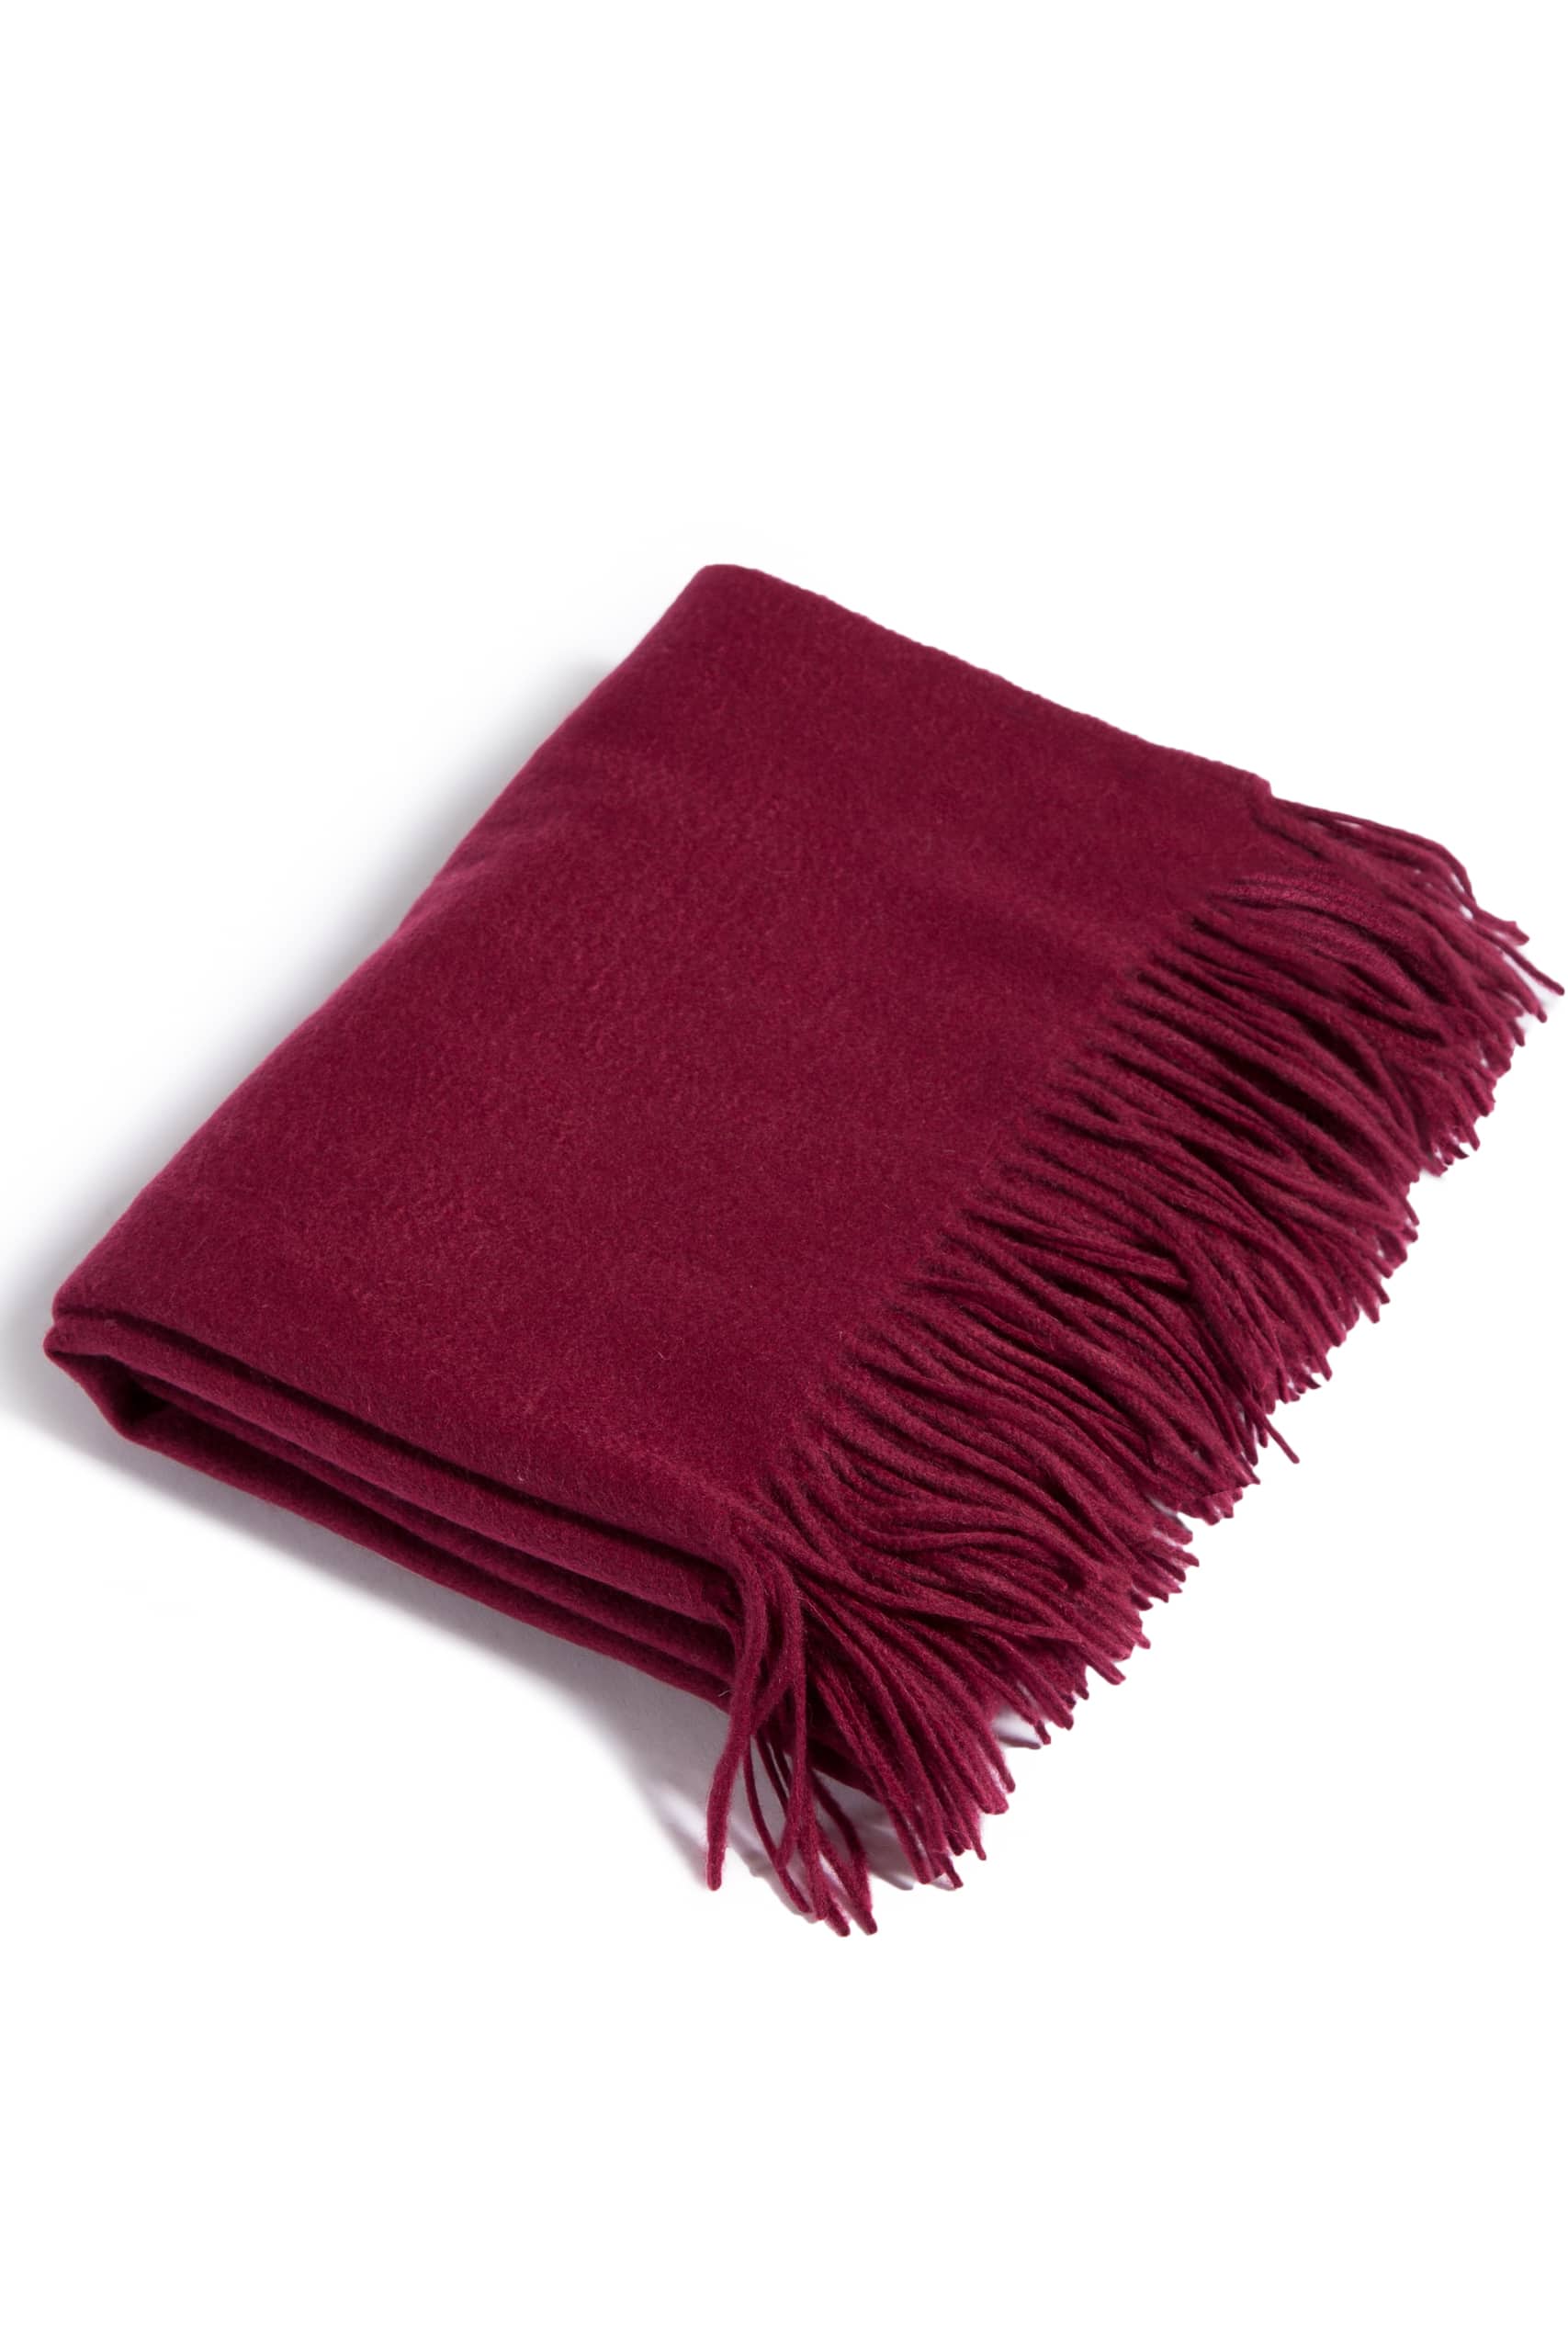 100% Pure Cashmere Fringe Throw Blanket with Gift Box Home>Bedding>Throw Fishers Finery Cabernet 